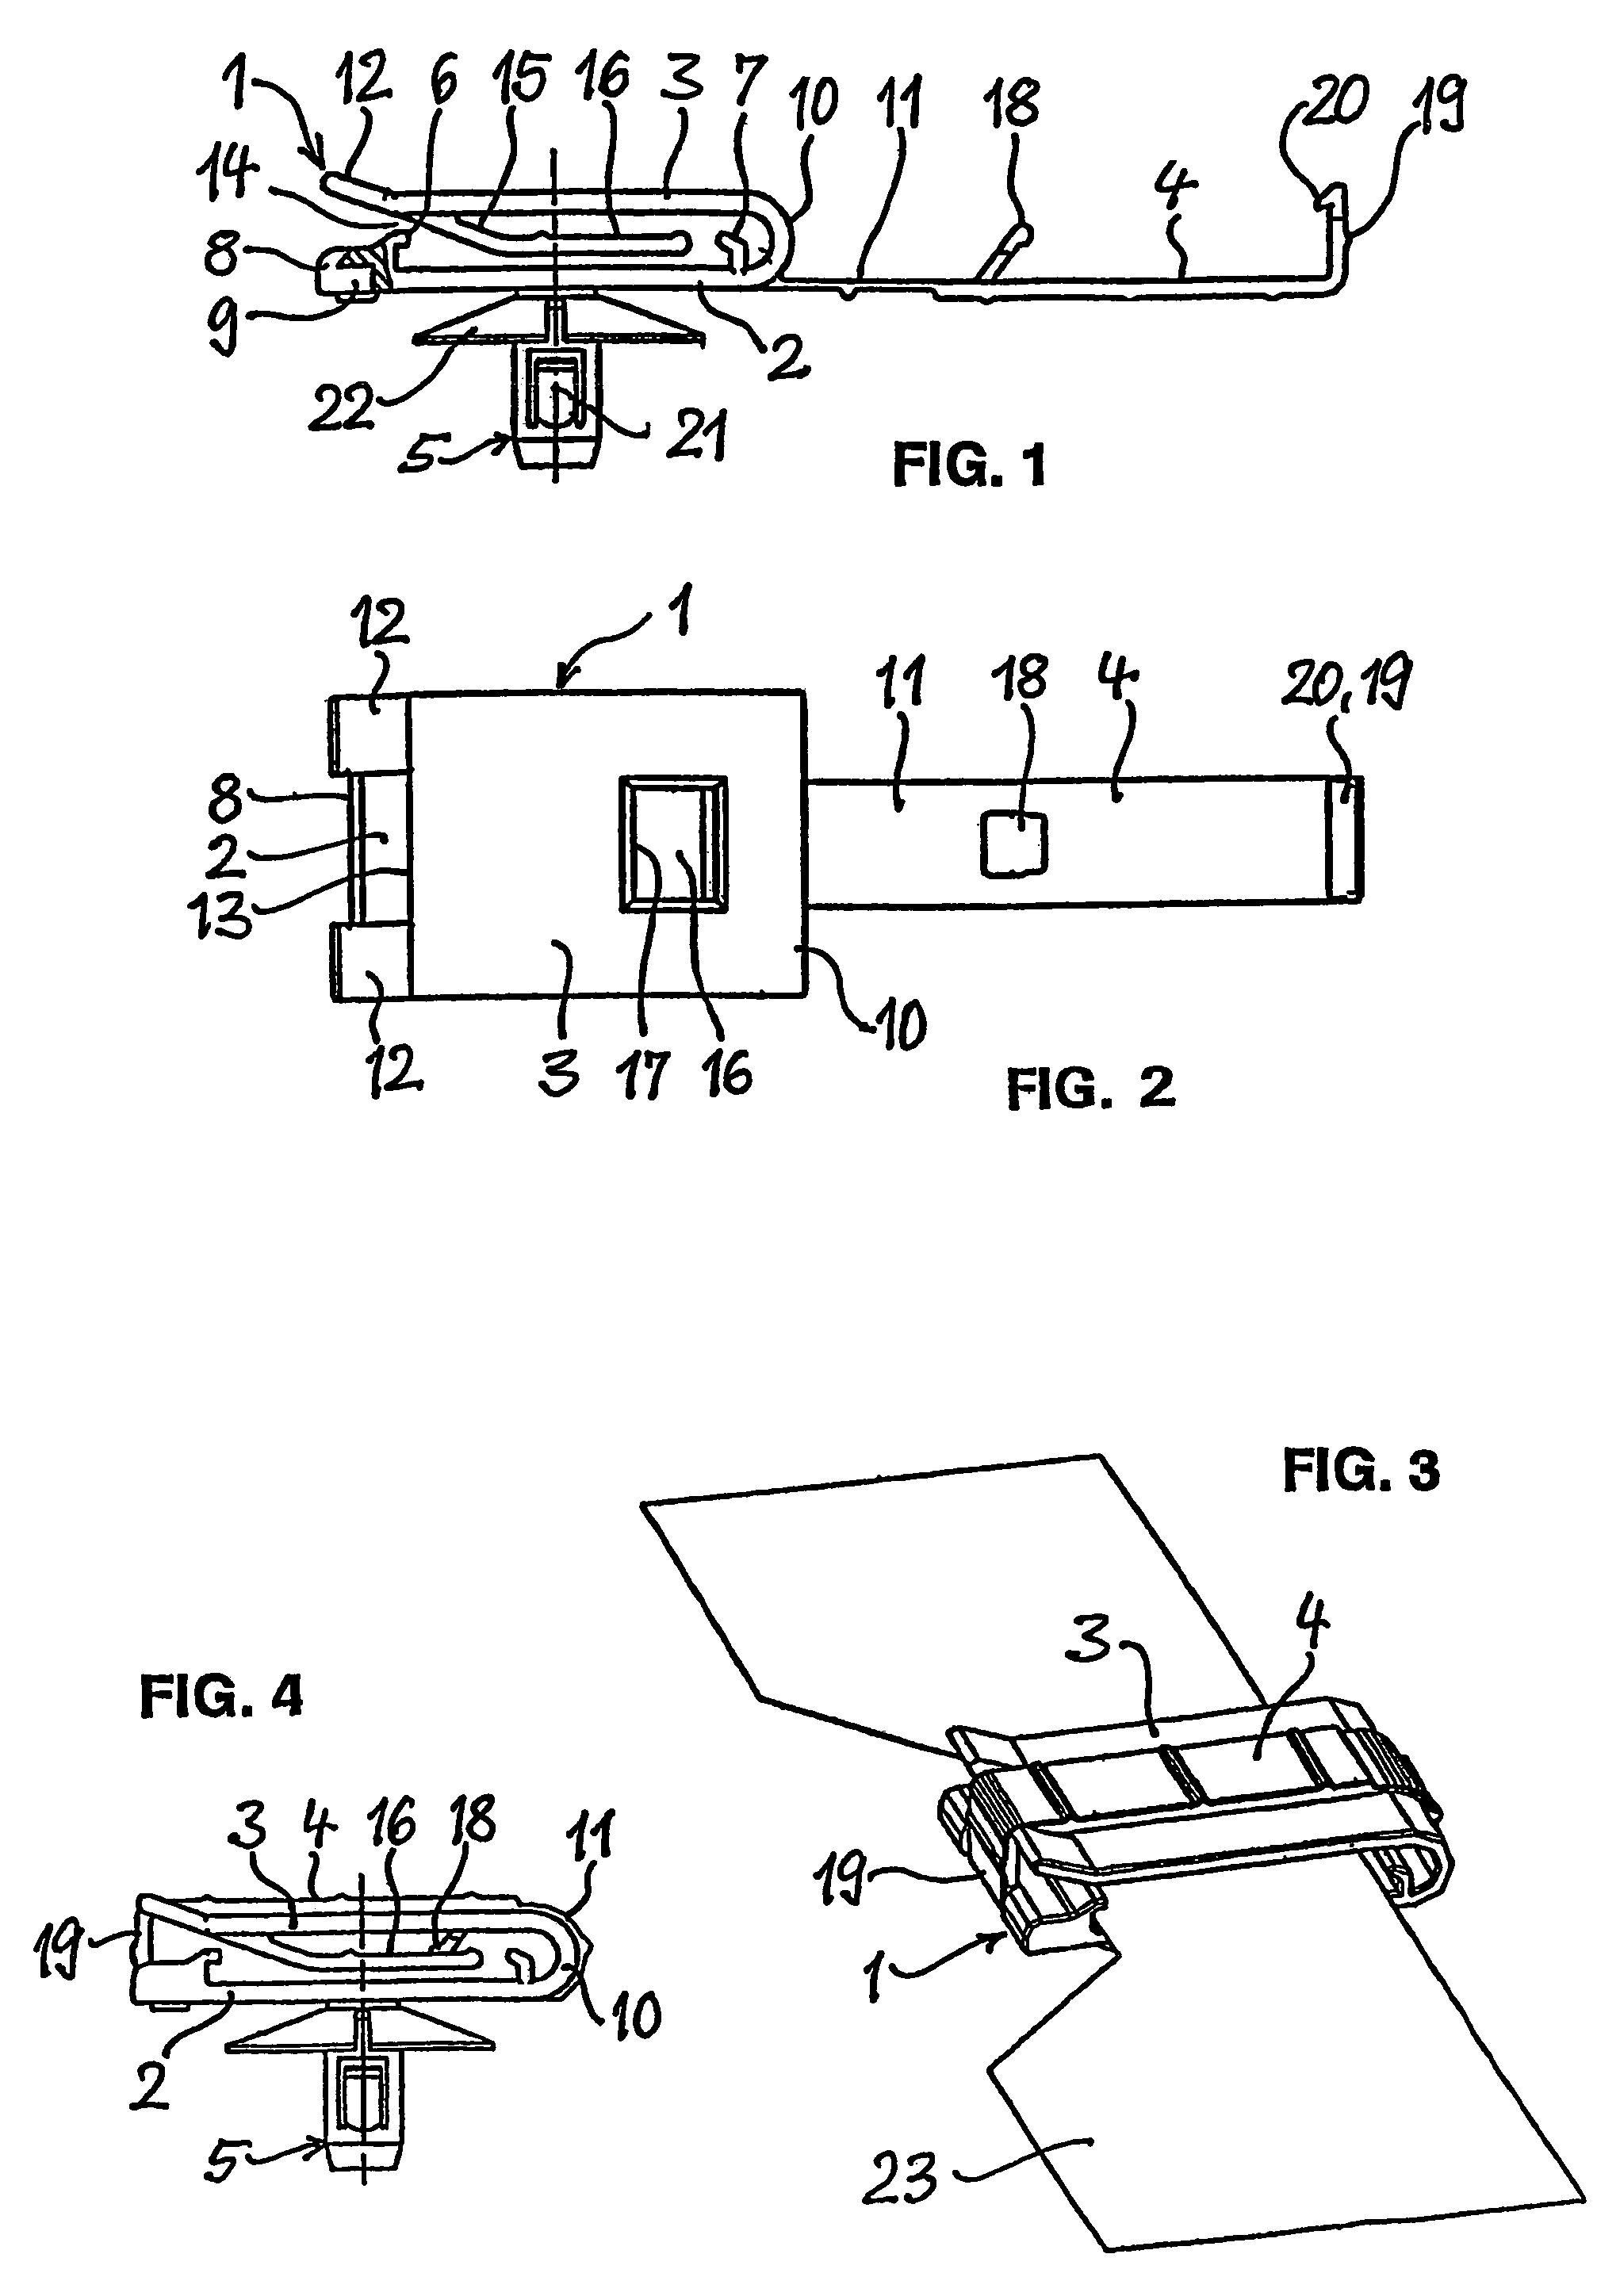 Clamp for holding of flat objects